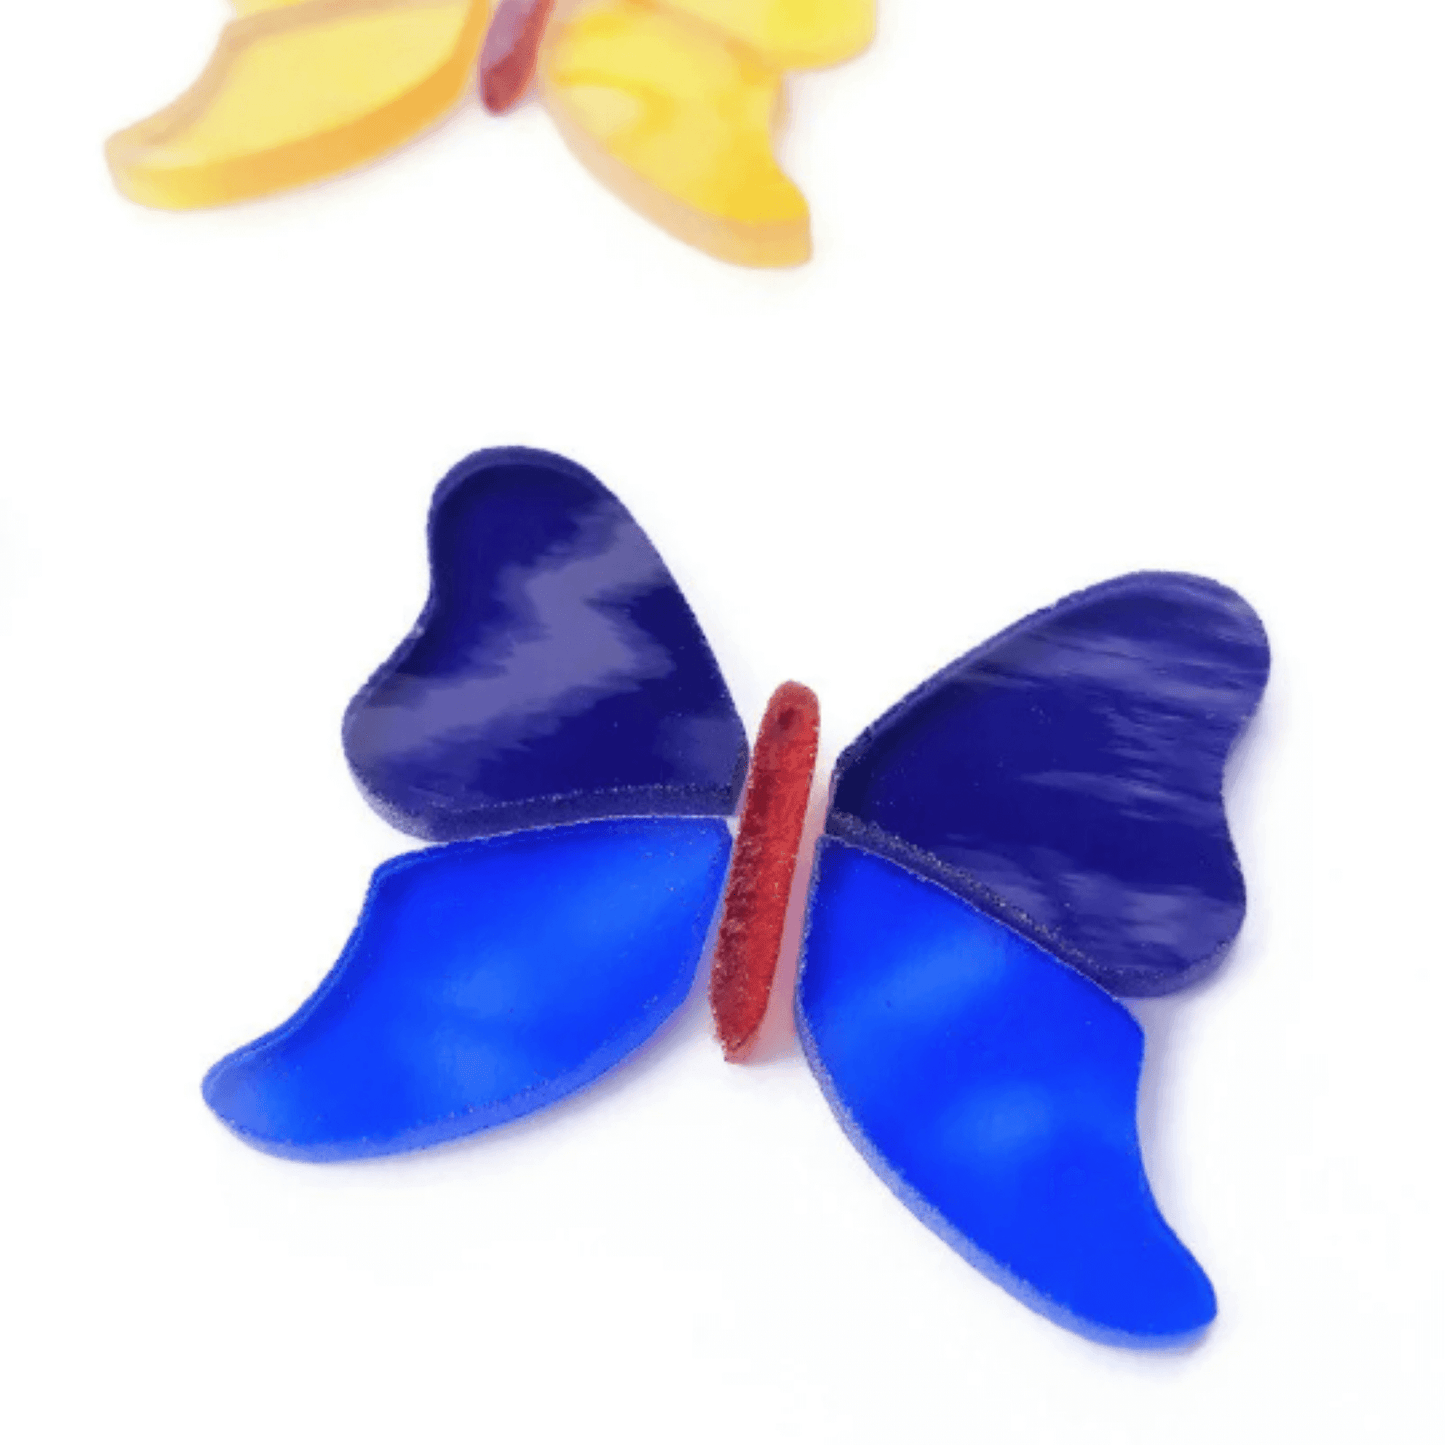 Precut Stained Glass Butterflies, 2 Inches, Package of 6, Rainbow Assortment Mosaic Glass Kit, DIY Craft Supplies